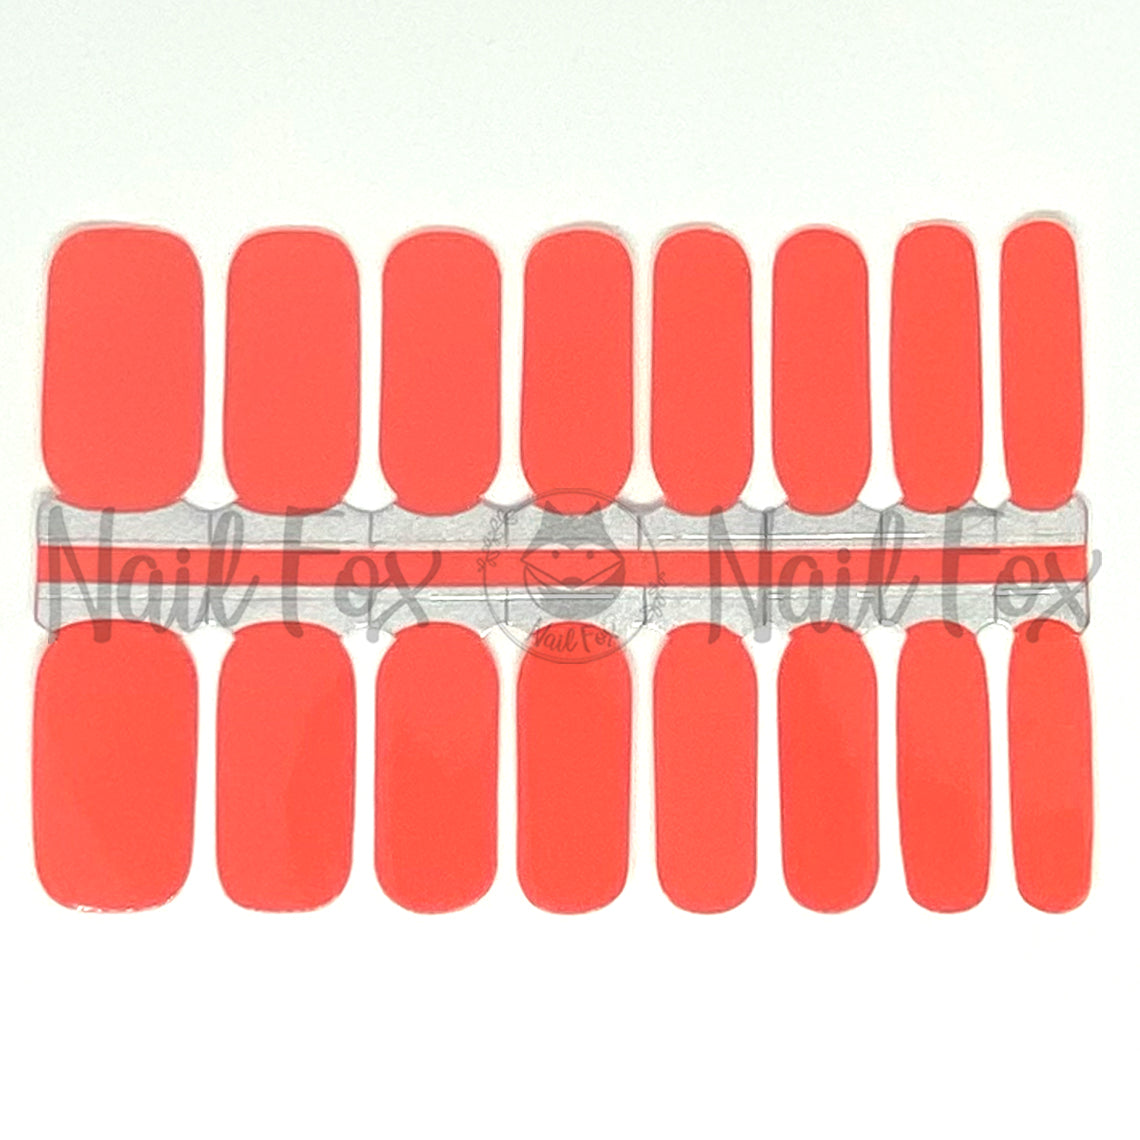 Coral Solid Nail Wraps